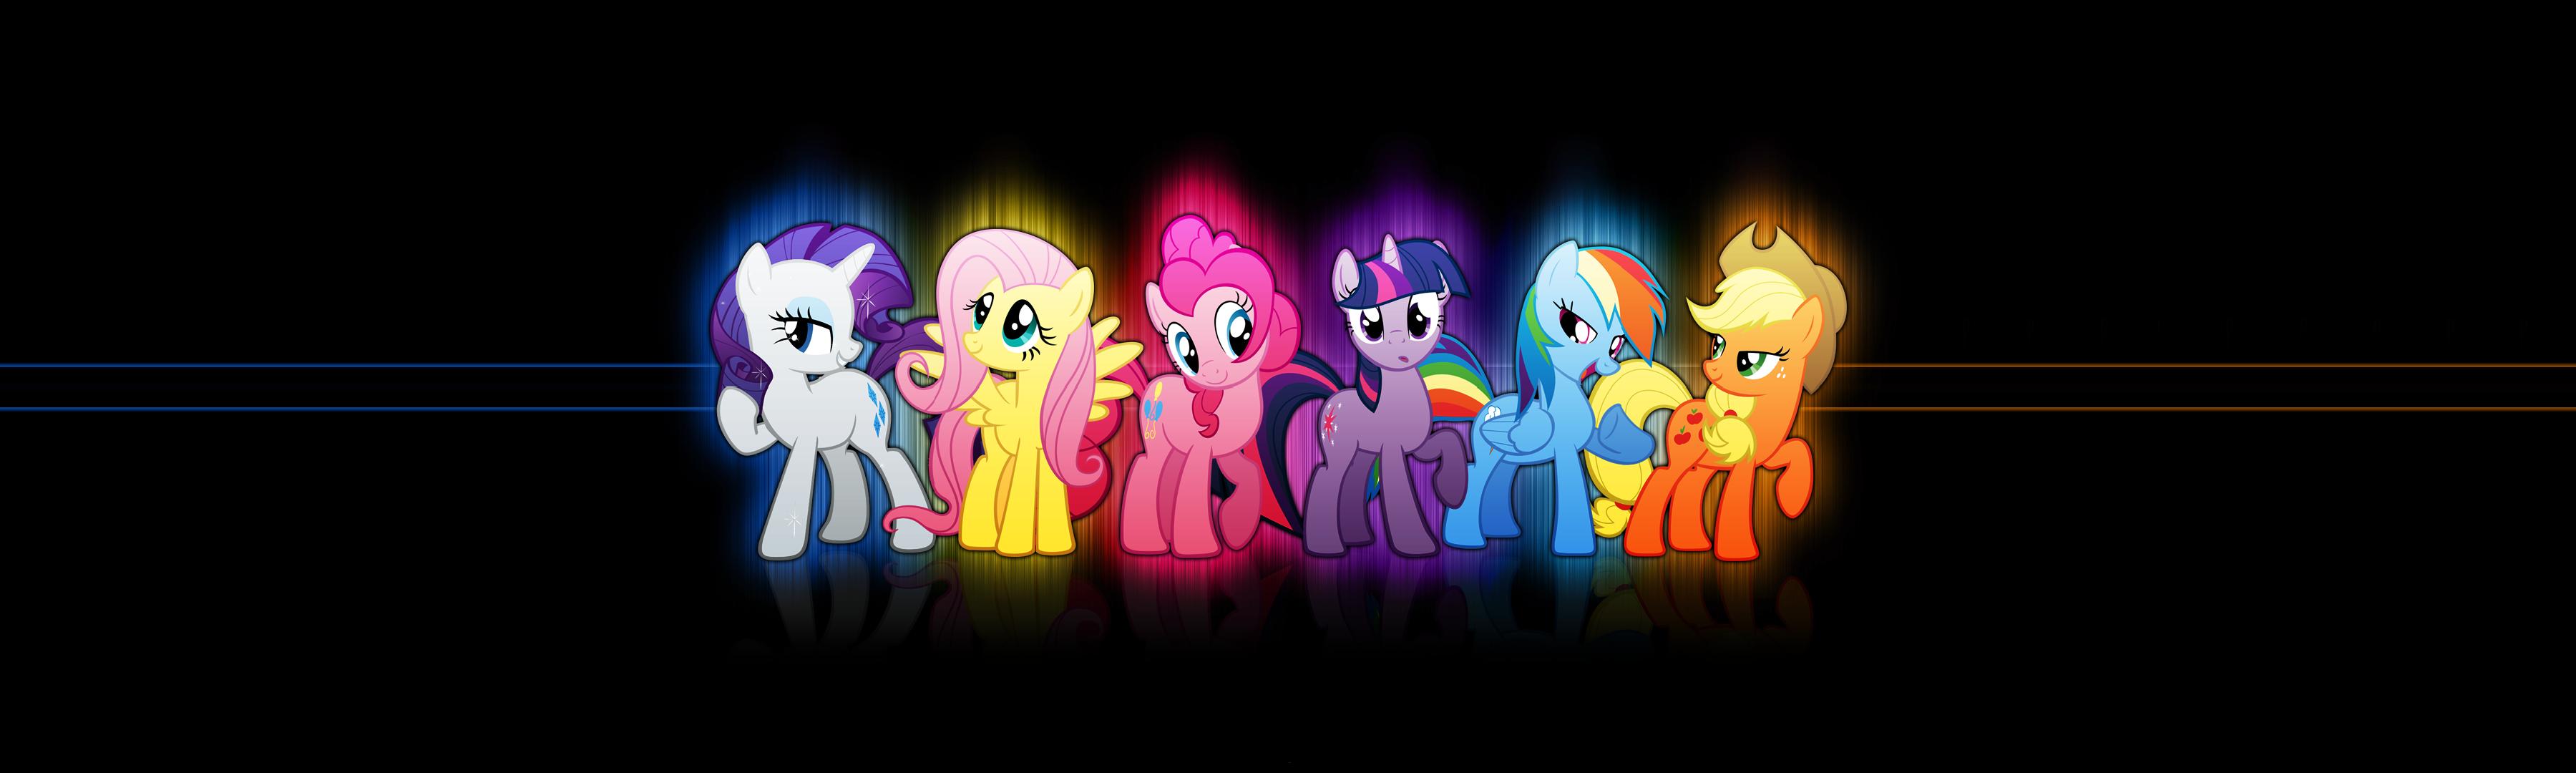 My Little Pony Dual Screen Wallpapers